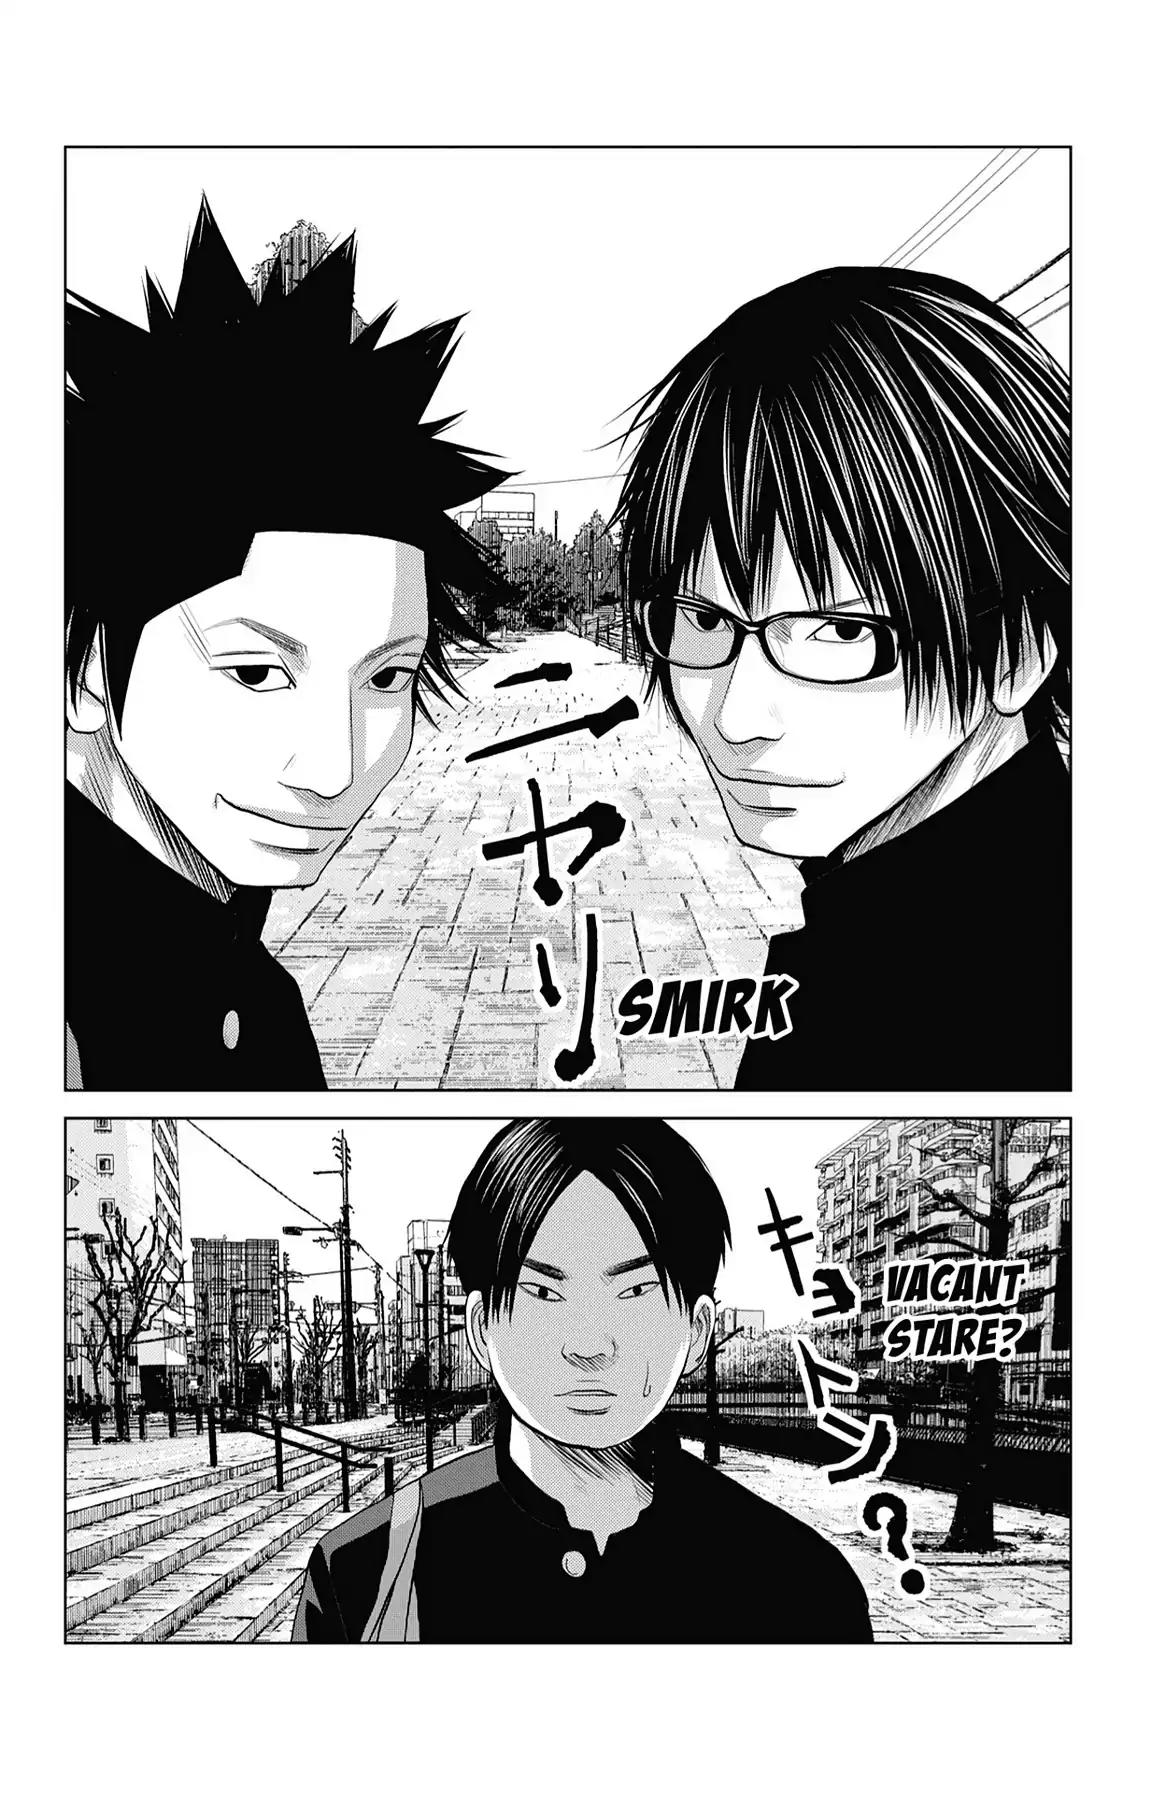 Setoutsumi Vol.5 CHAPTER 36 - SMIRKS AND BLANK STARES